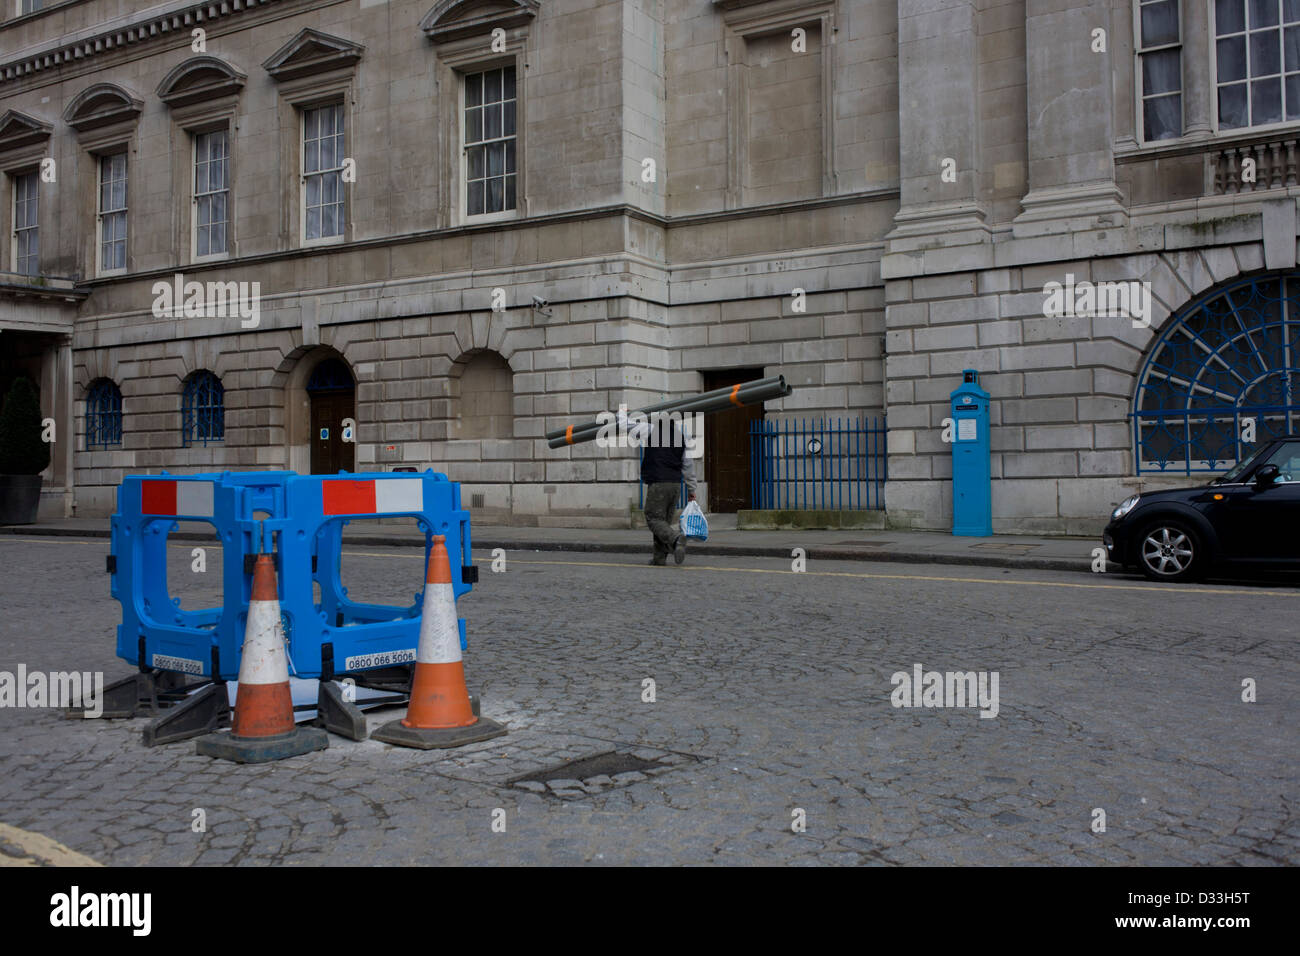 A blue-themed street landscape of a safety fencing, a blue police box and a rider on a blue Boris bike outside Mansion House in the City of London. Stock Photo